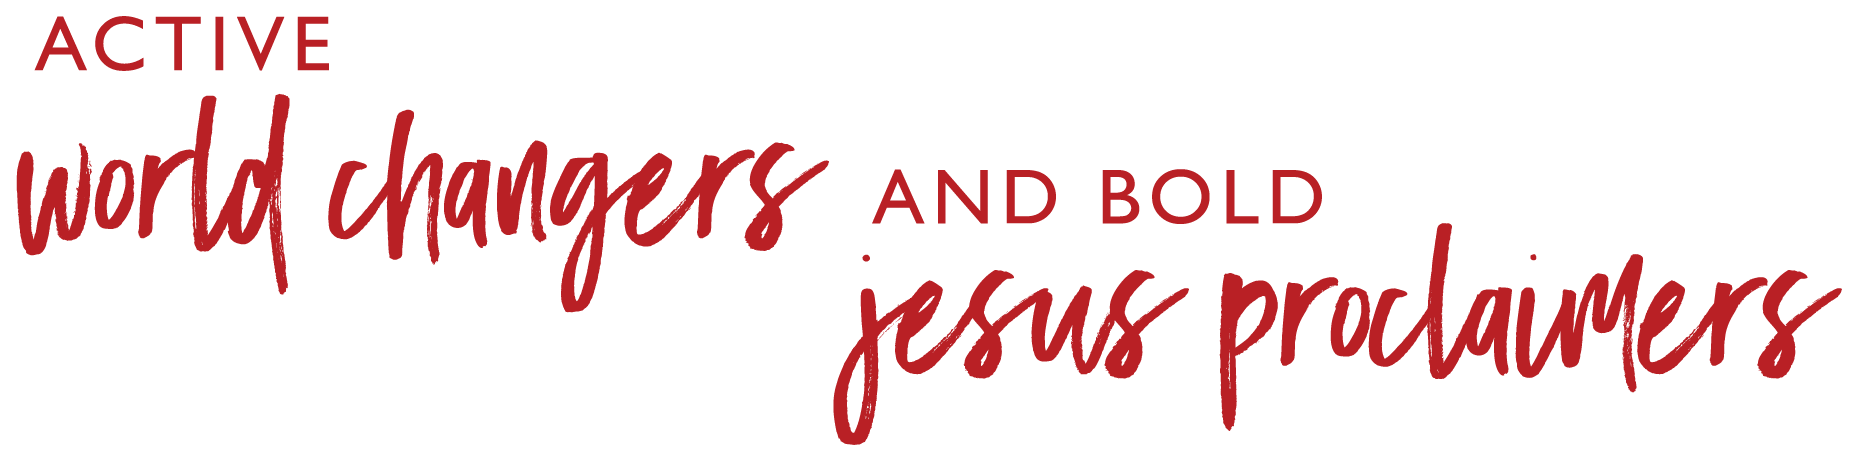 Active World Changers Bold Jesus Proclaimers Banner PNG